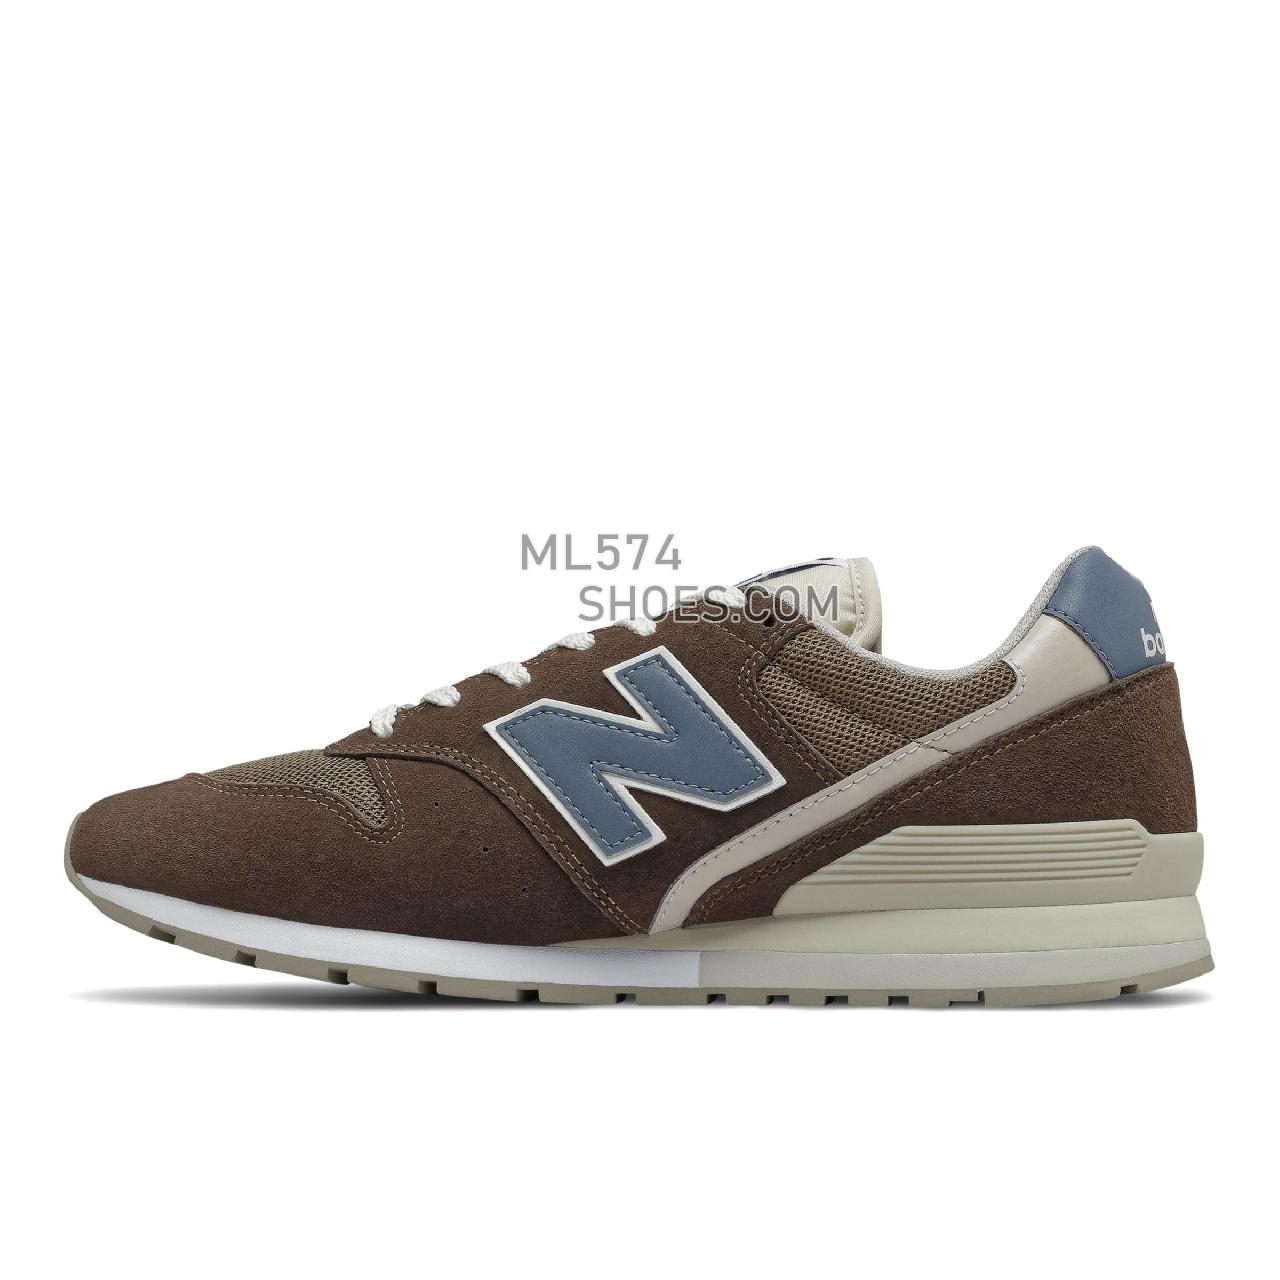 New Balance 996v2 - Men's Classic Sneakers - Black Coffee with Deep Porcelain Blue - CM996HR2